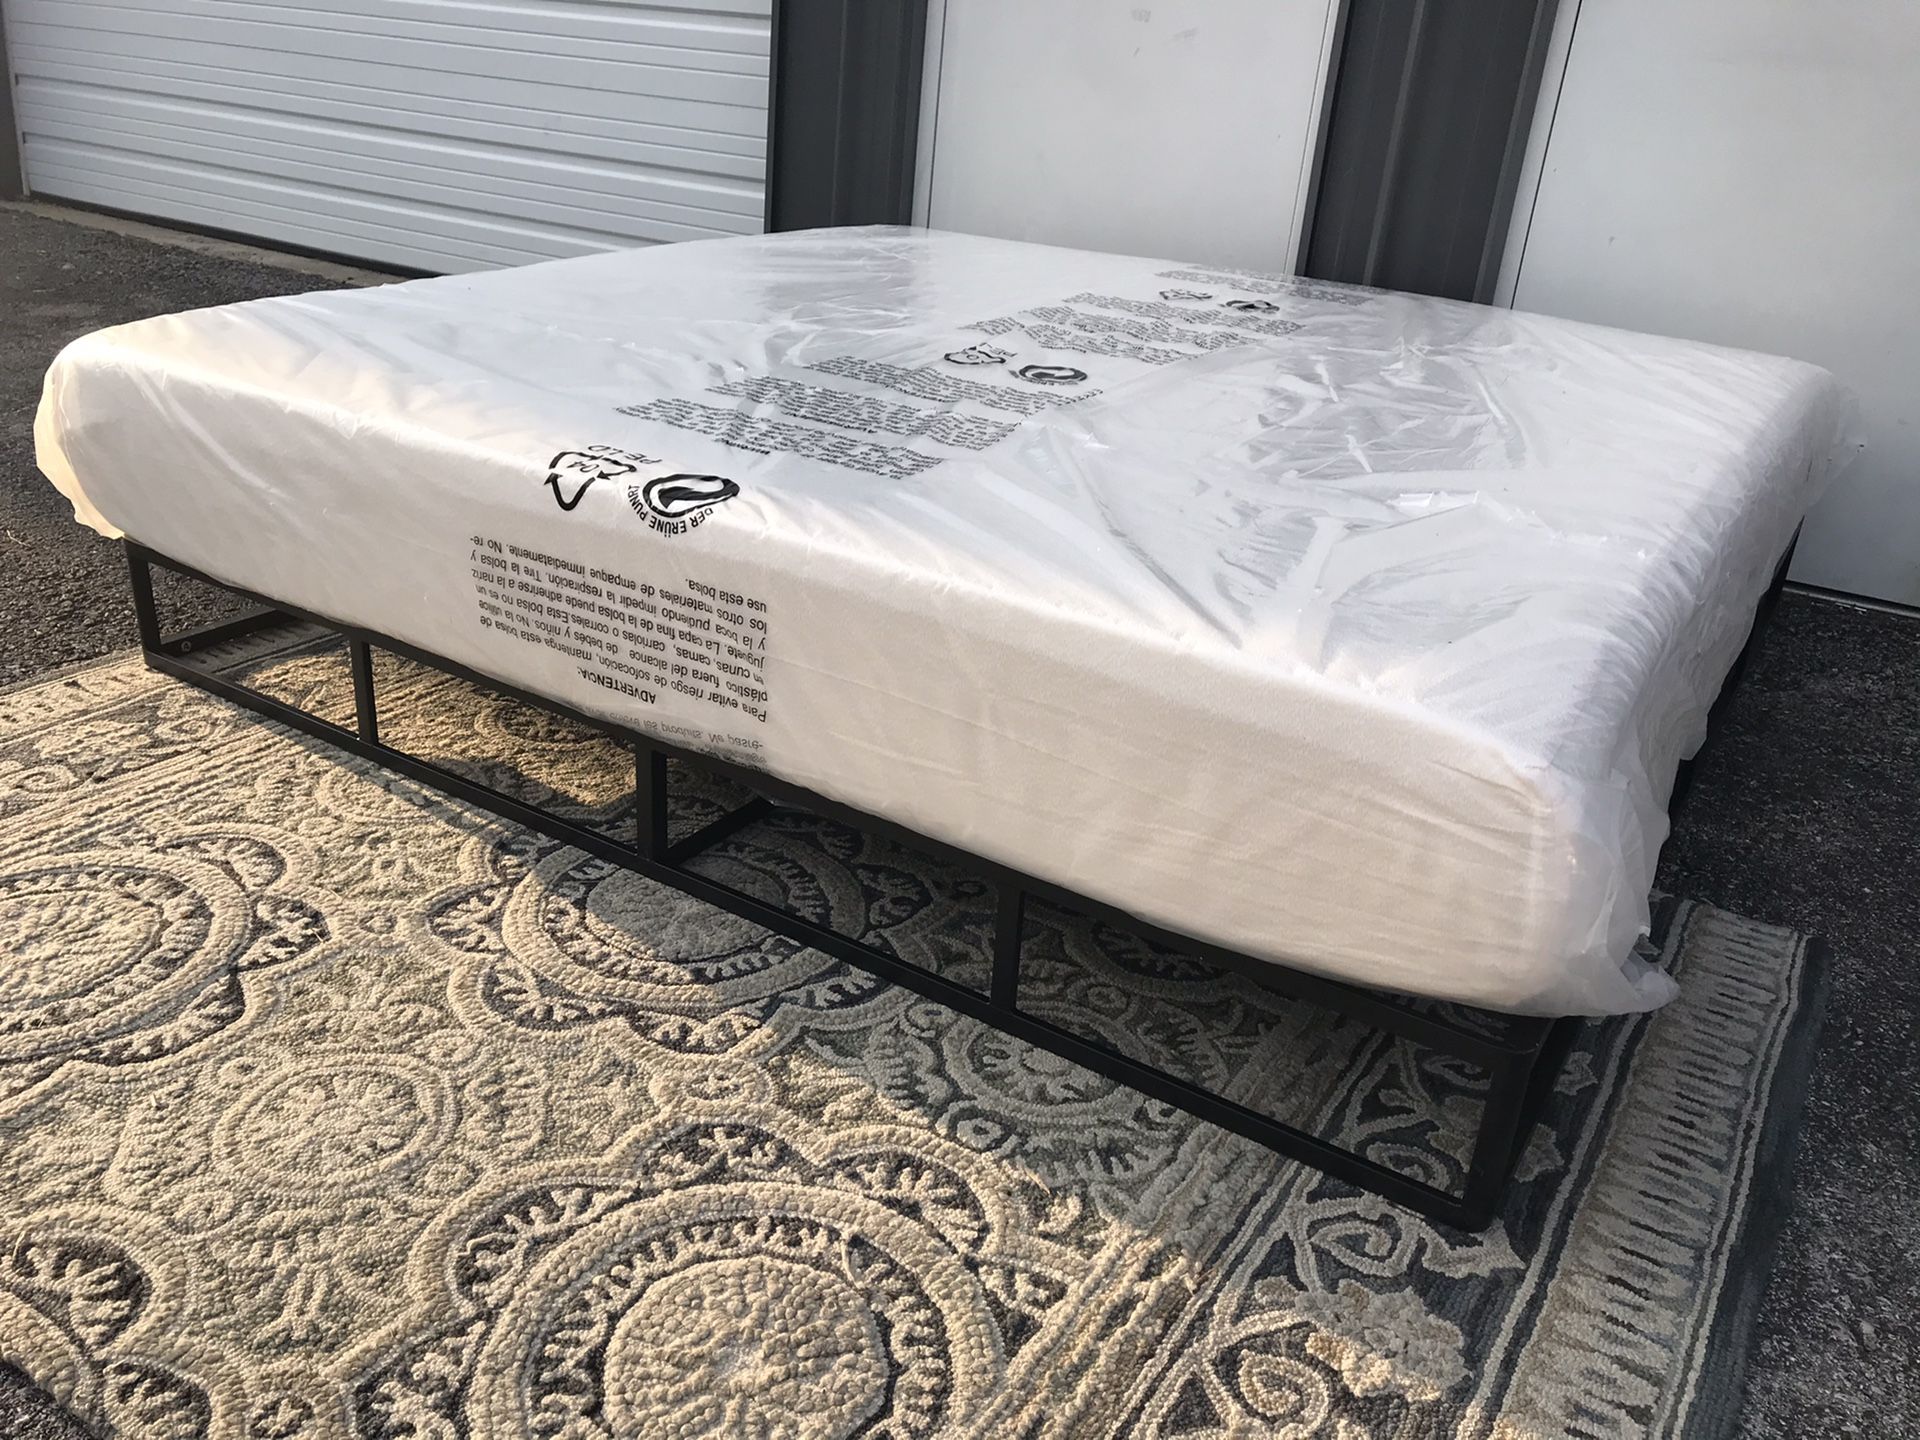 New KING size mattress and smart box spring